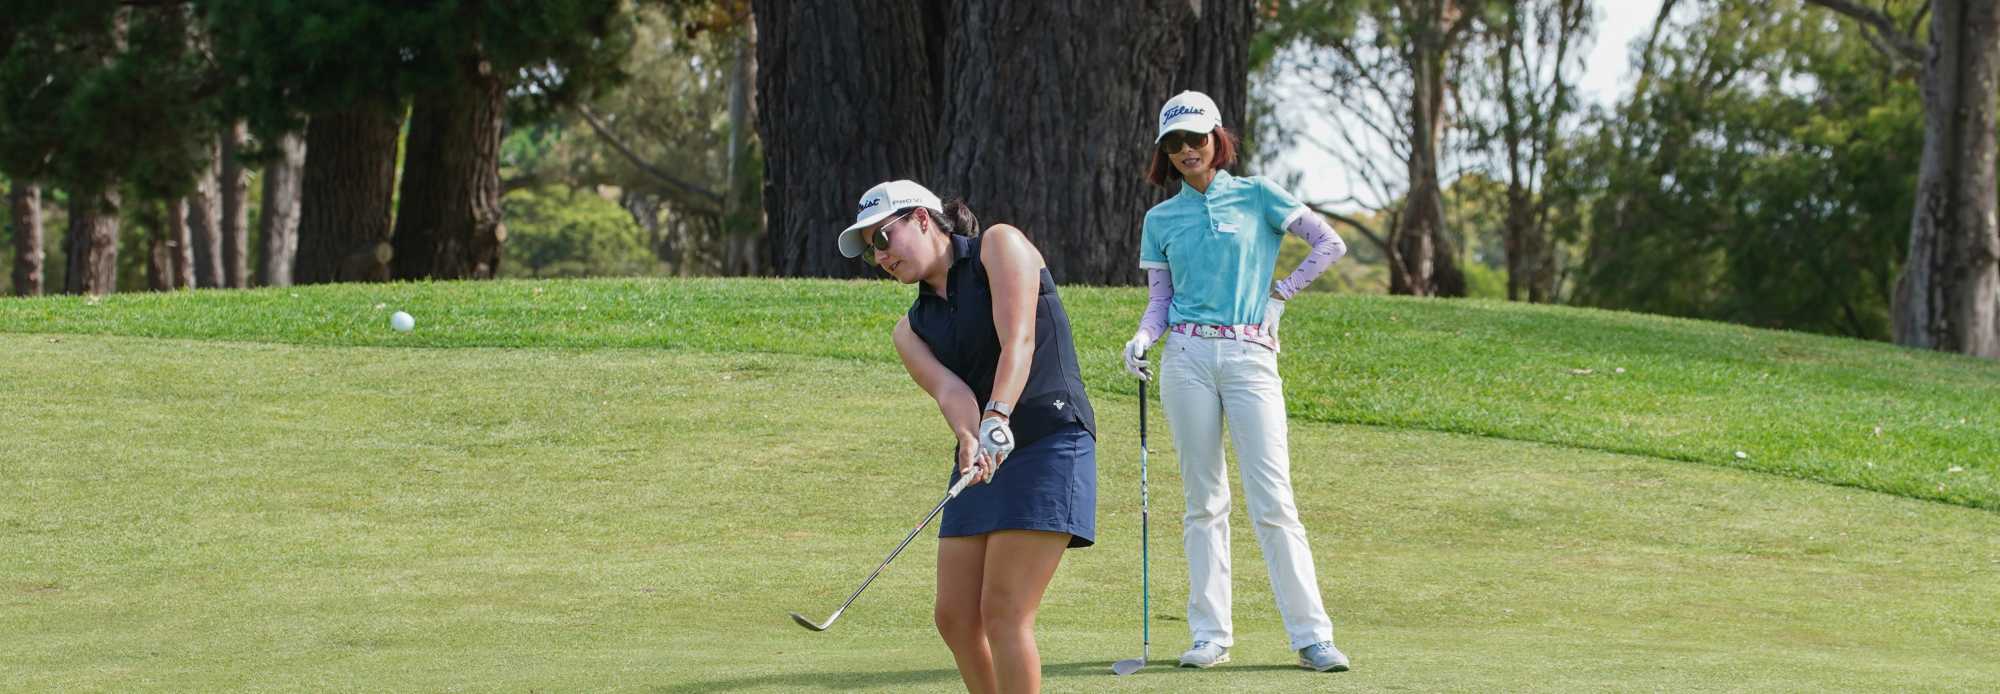 Two women on the golf course - Golf Care Blog